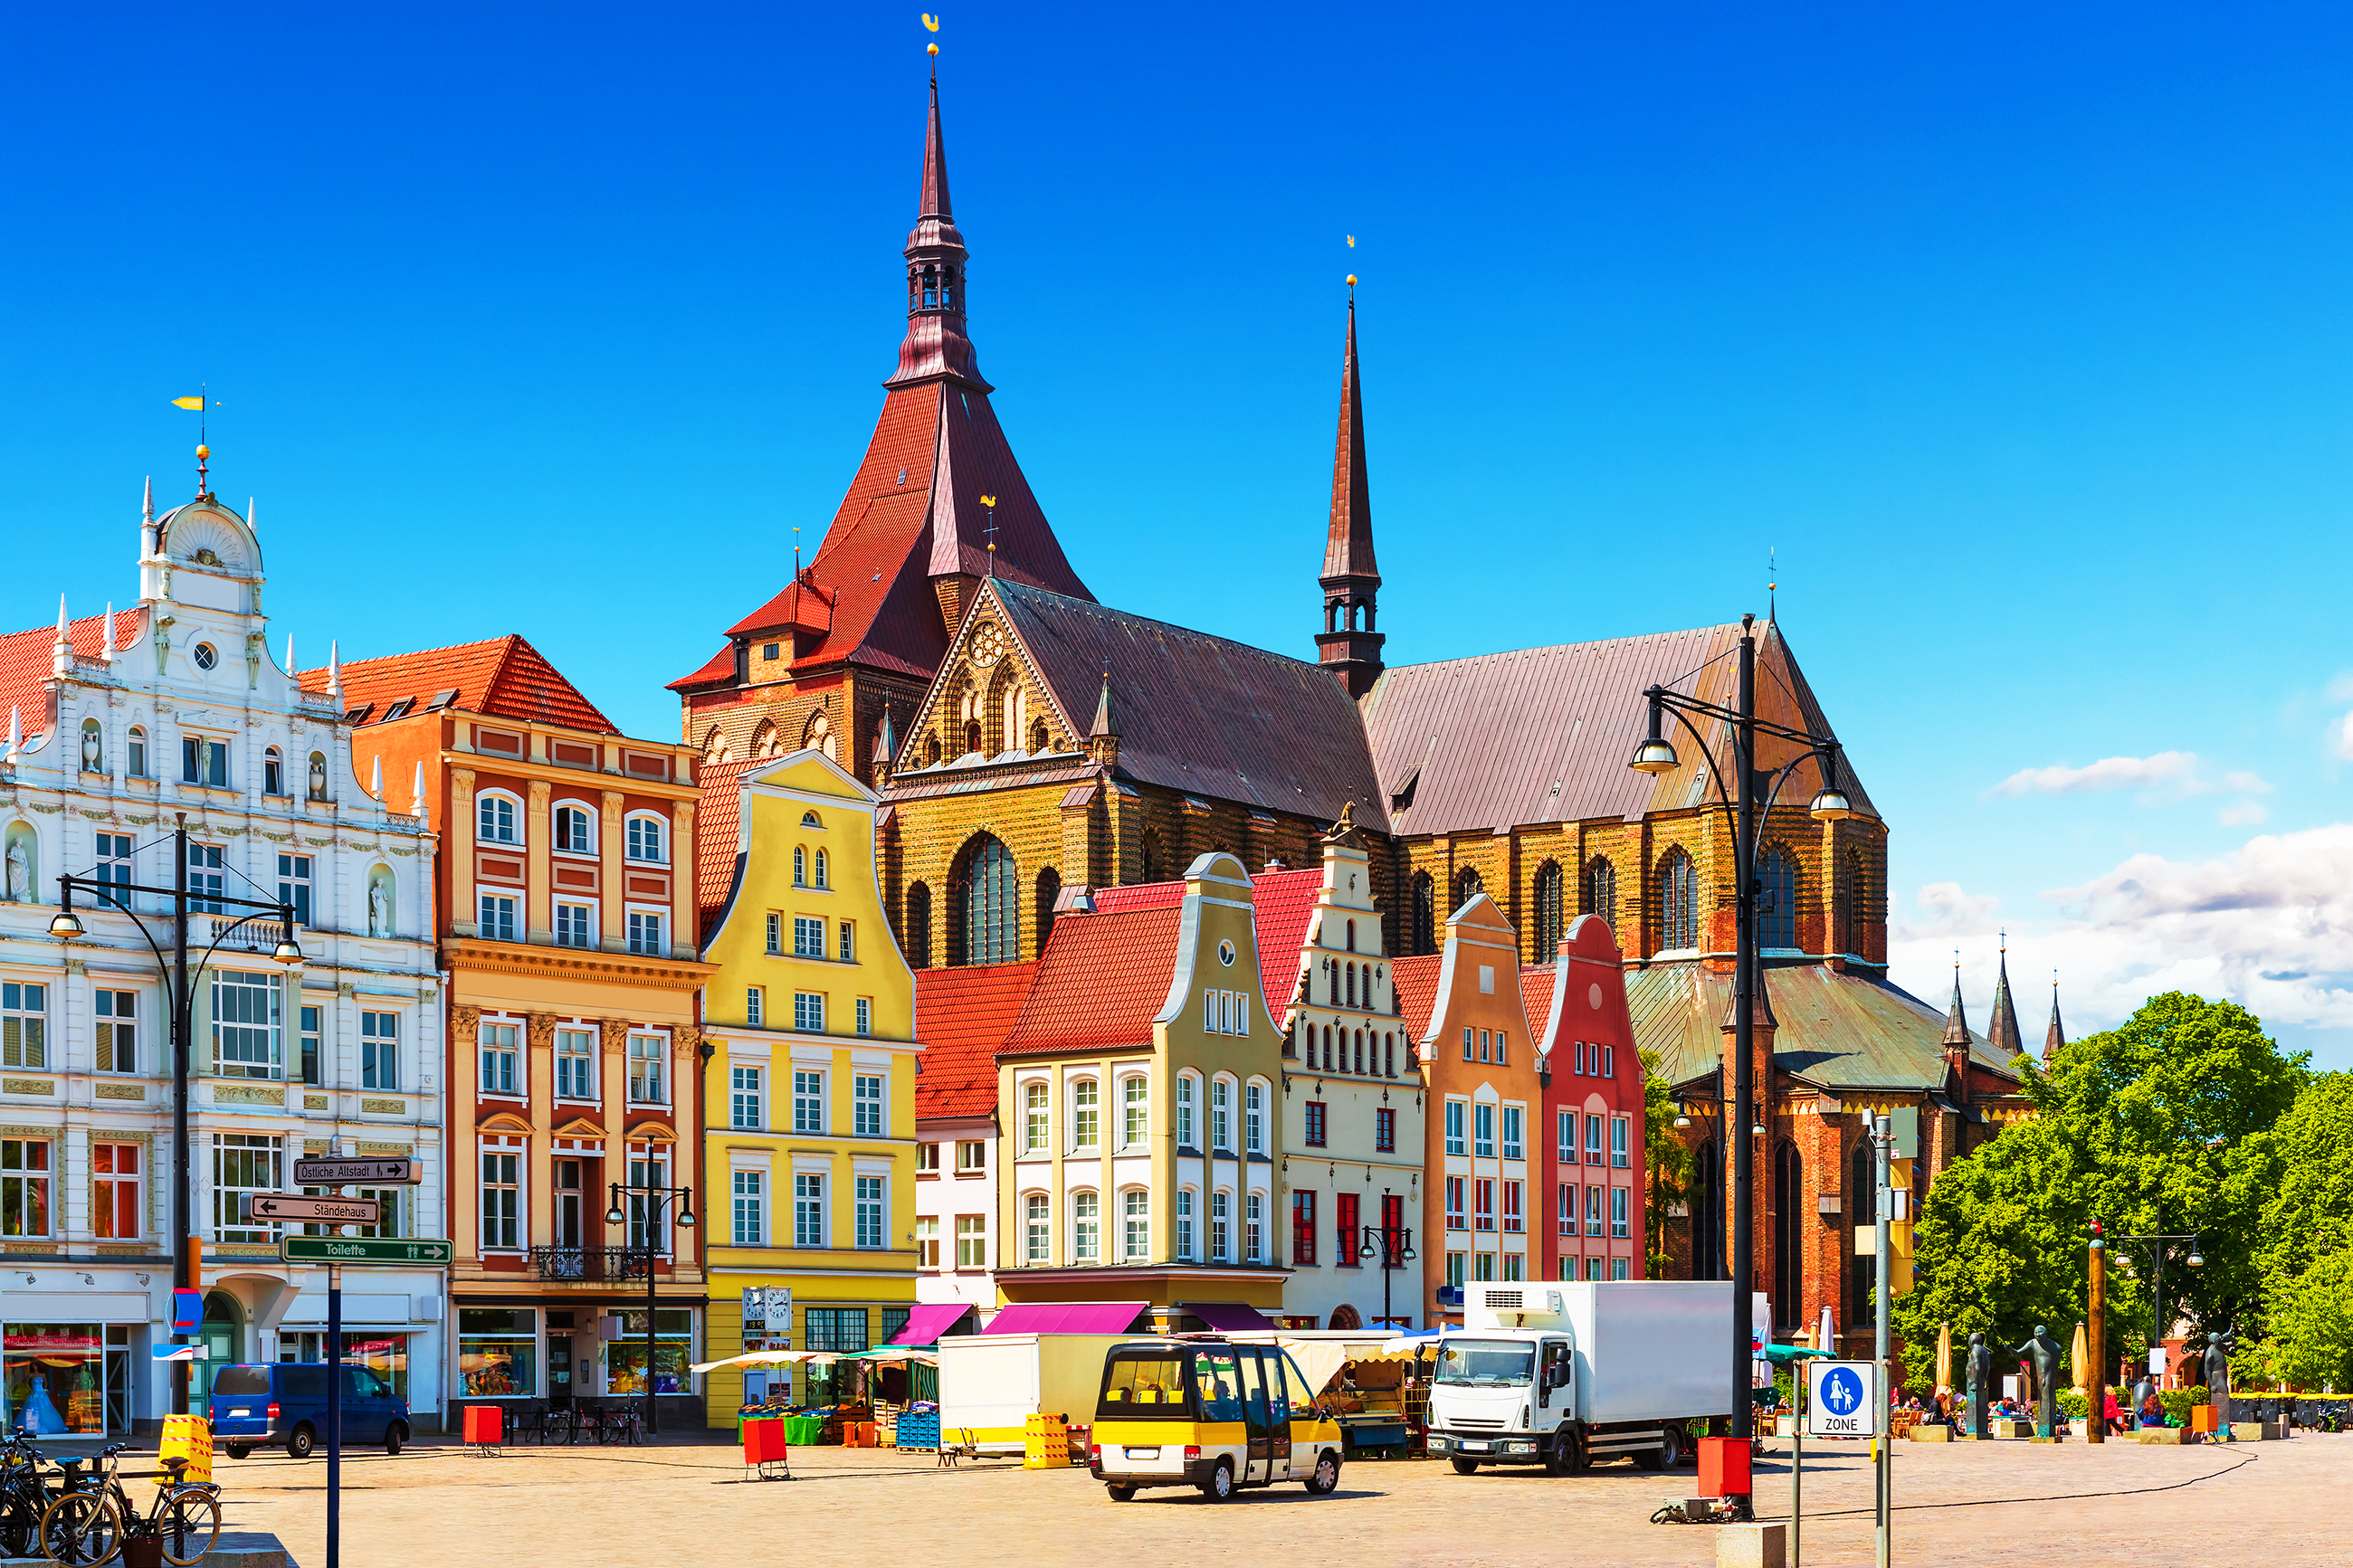 The image shows buidlgins of Rostock city in Germany